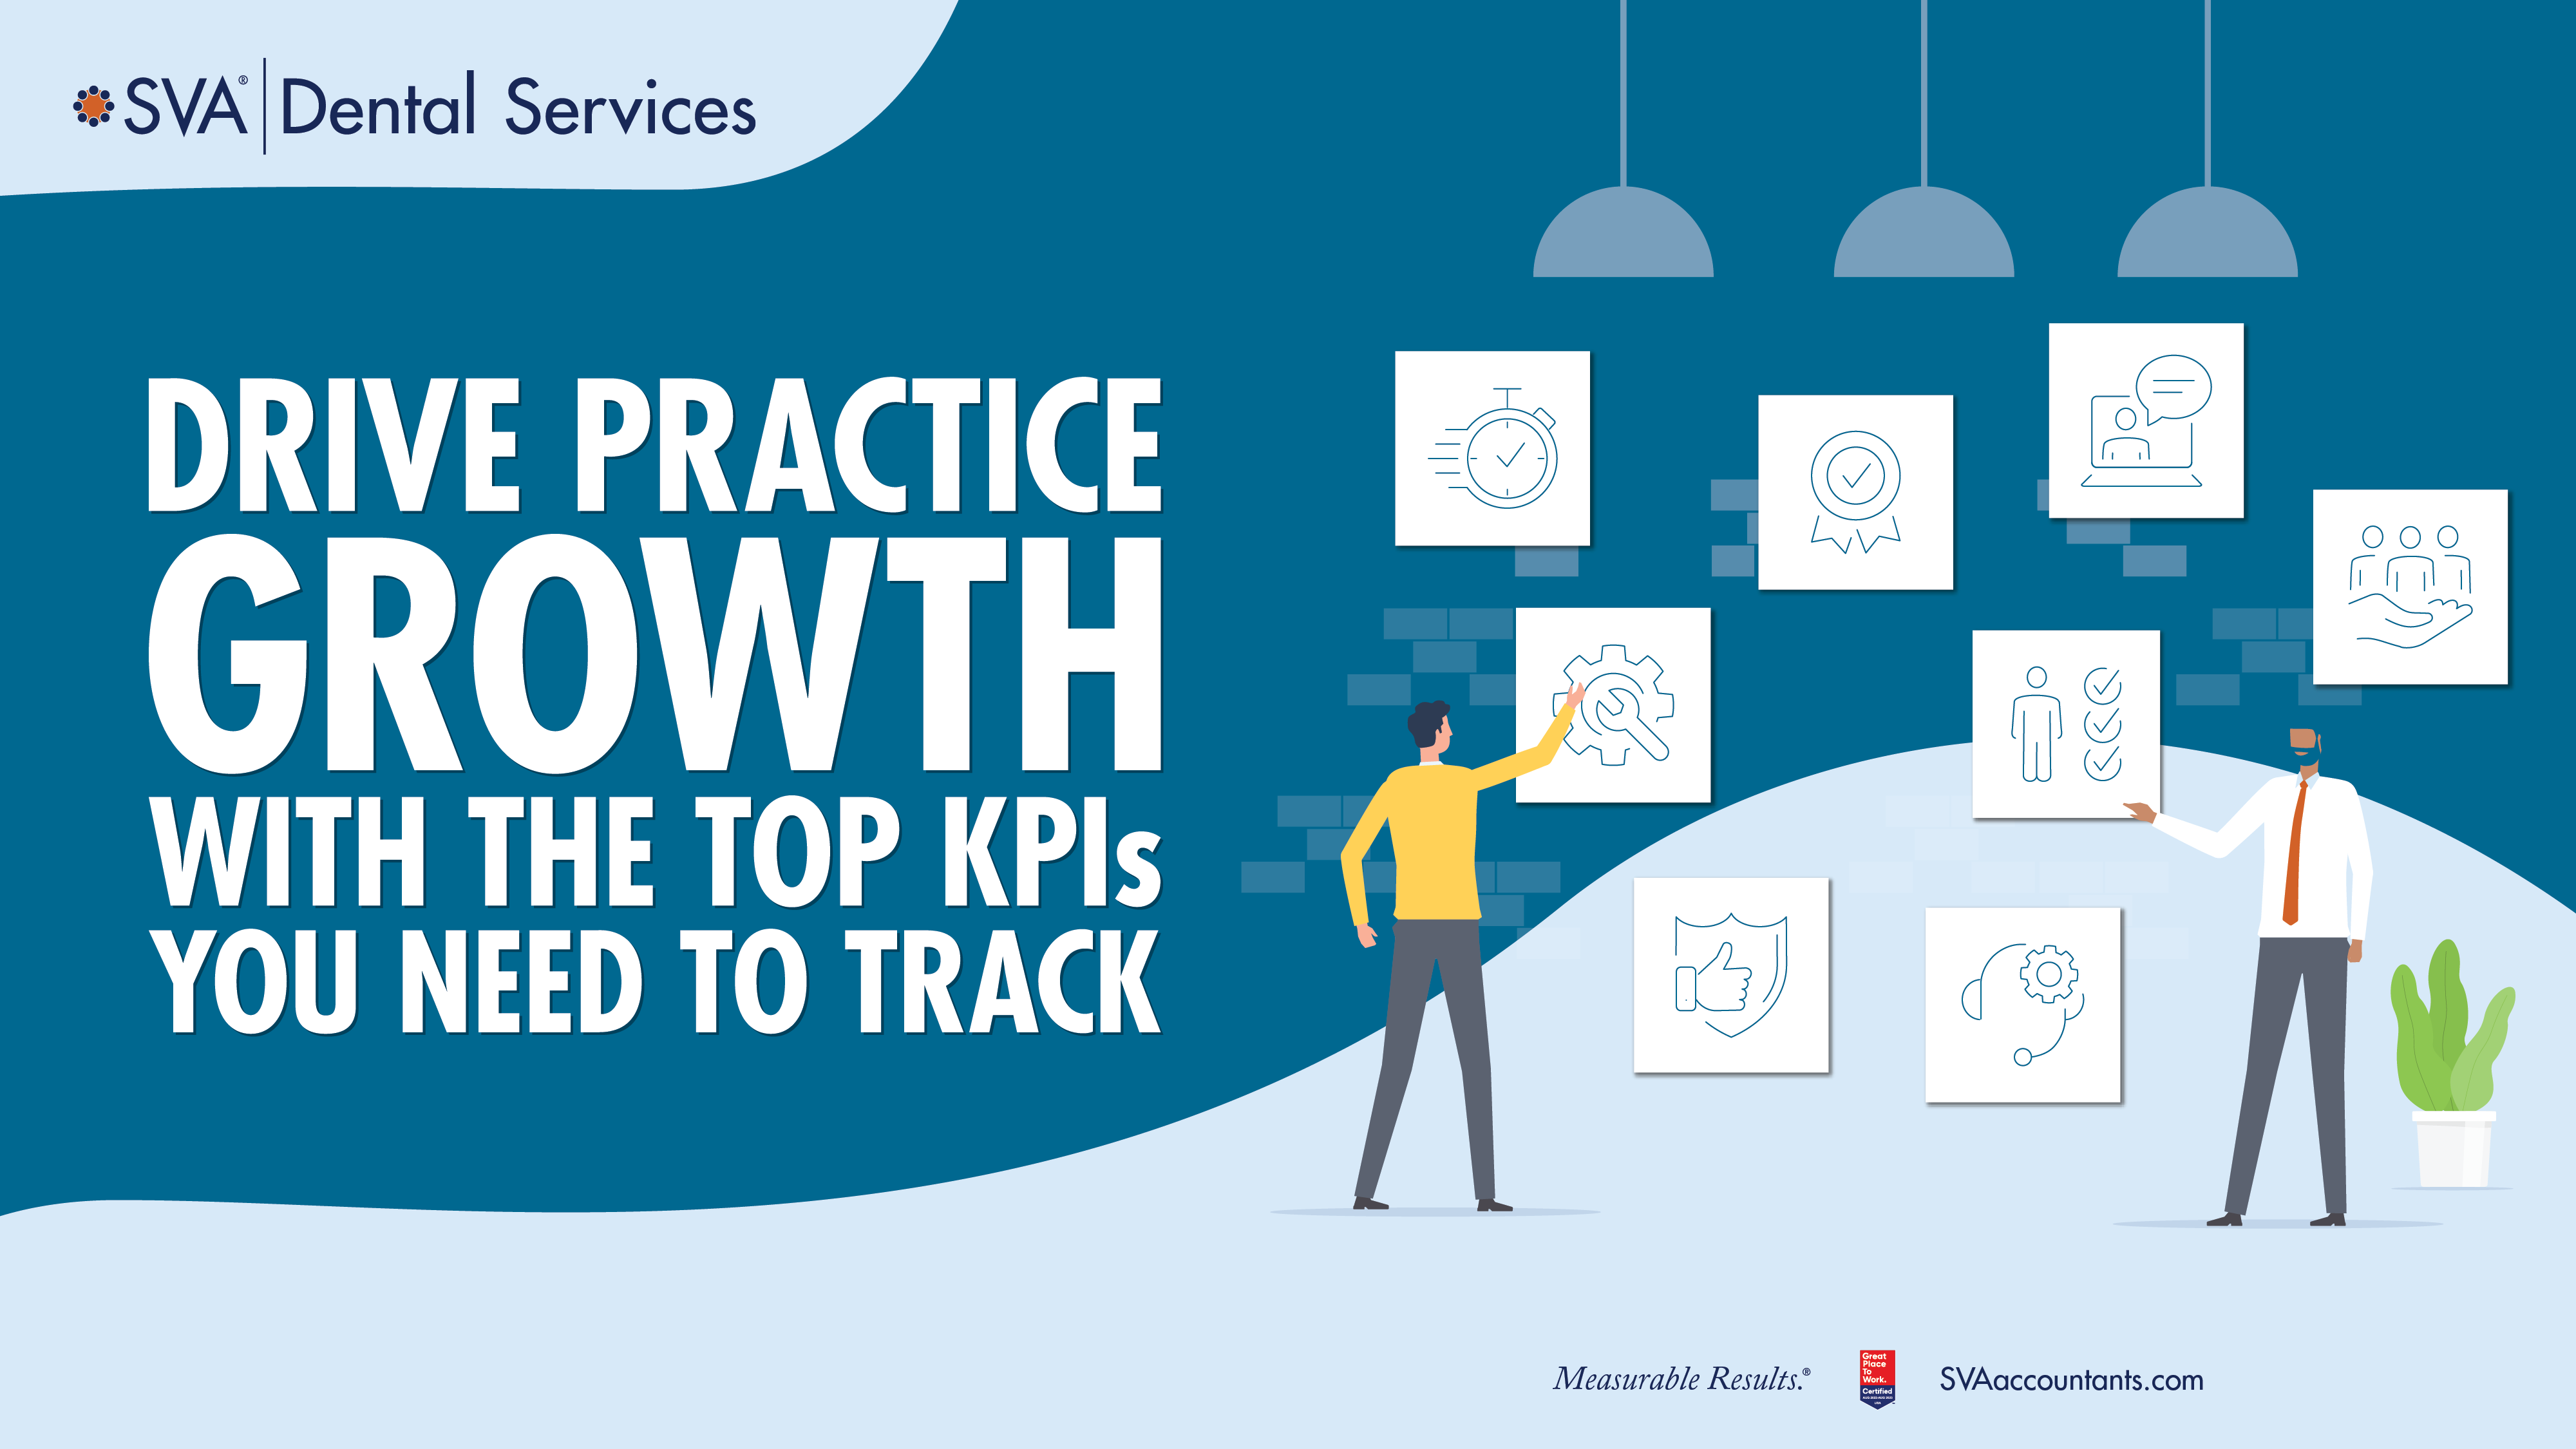 Drive Practice Growth with the Top KPIs You Need to Track